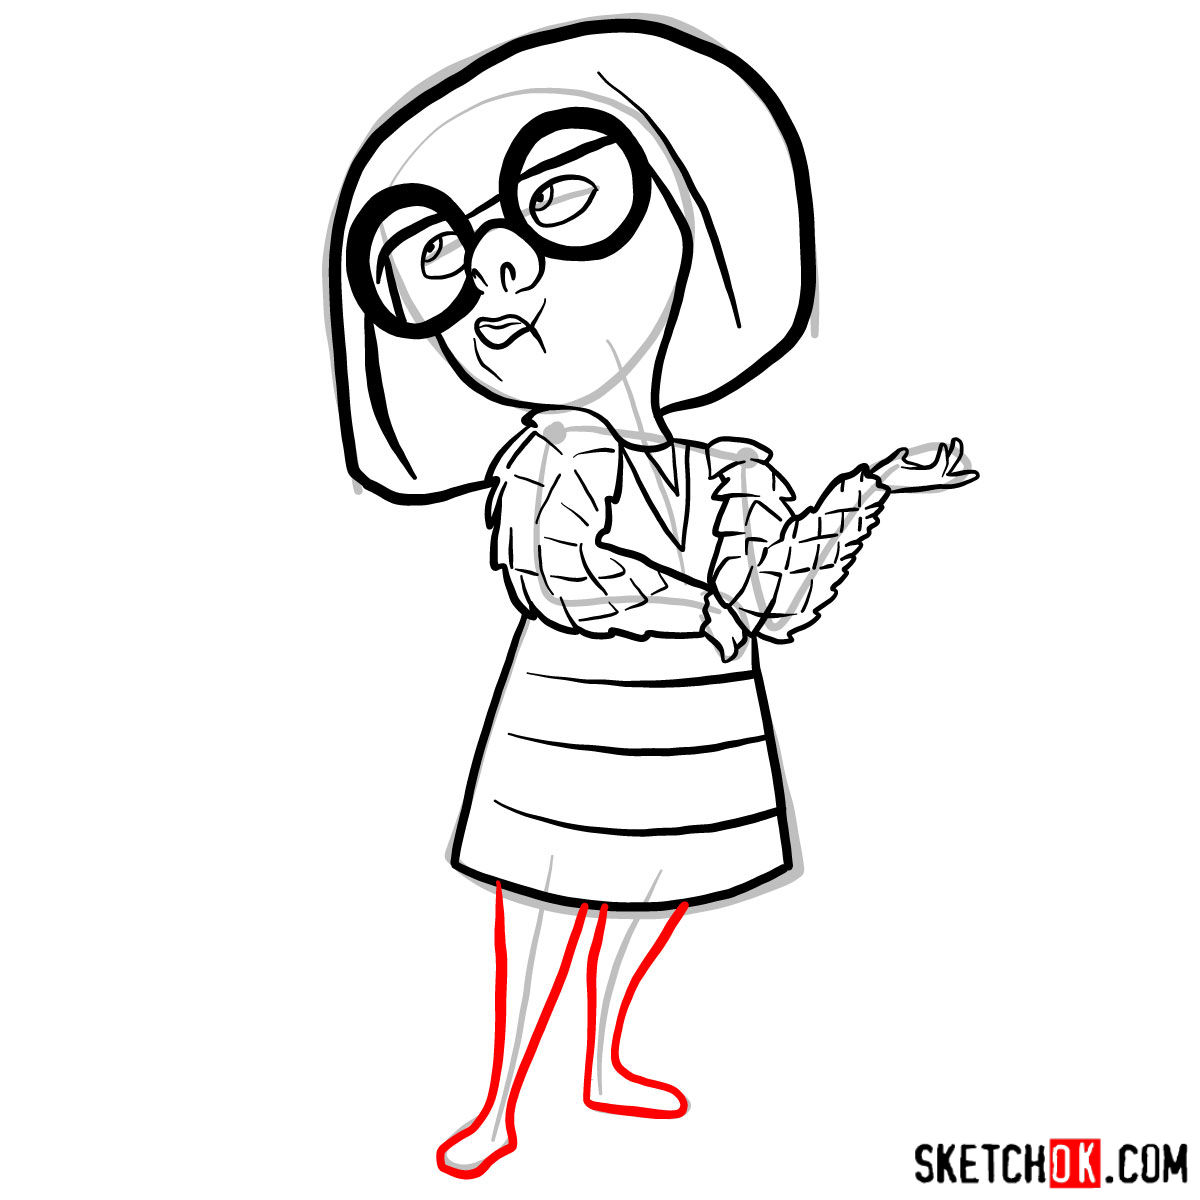 How to draw Edna Mode from The Incredibles - step 11